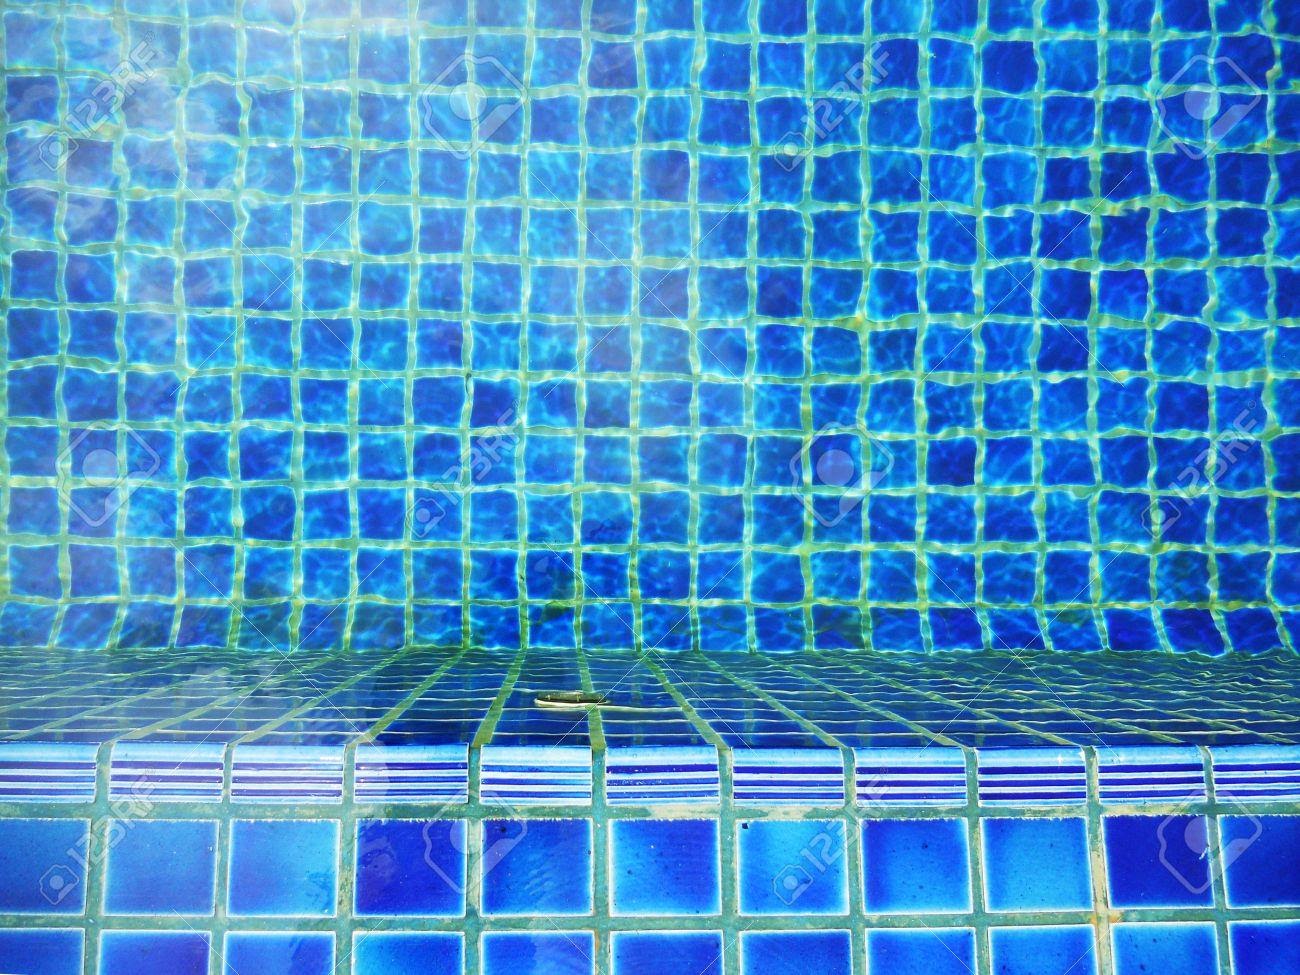 Swimming Pool Tiles, Hand-made Blue Ceramic Tiles In An Outdoor Swimming- pool Stock Photo, Picture And Royalty Free Image. Image 15075390.